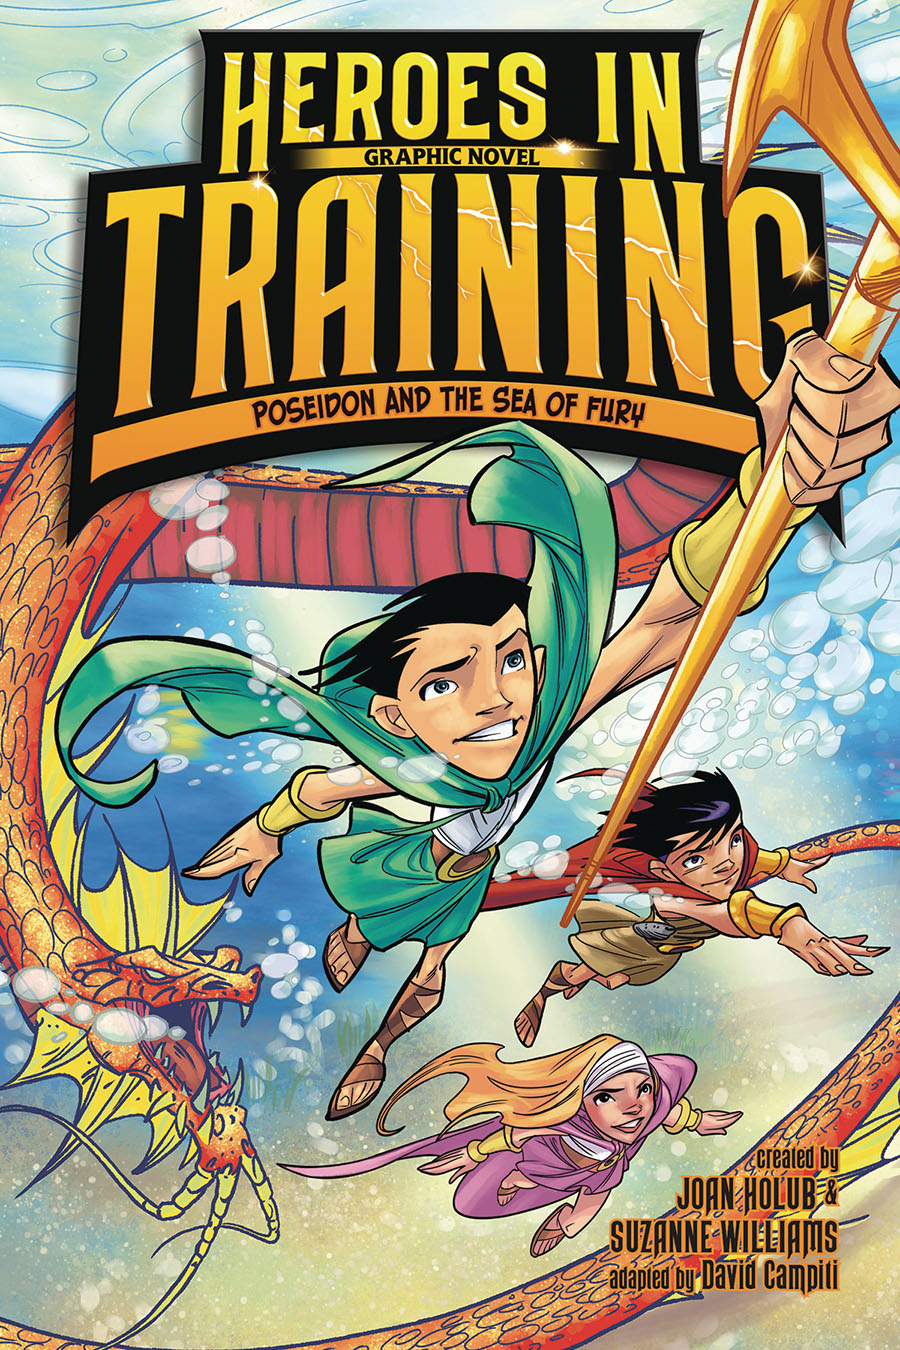 Heroes In Training Vol 2 Poseidon And The Sea Of Fury TP